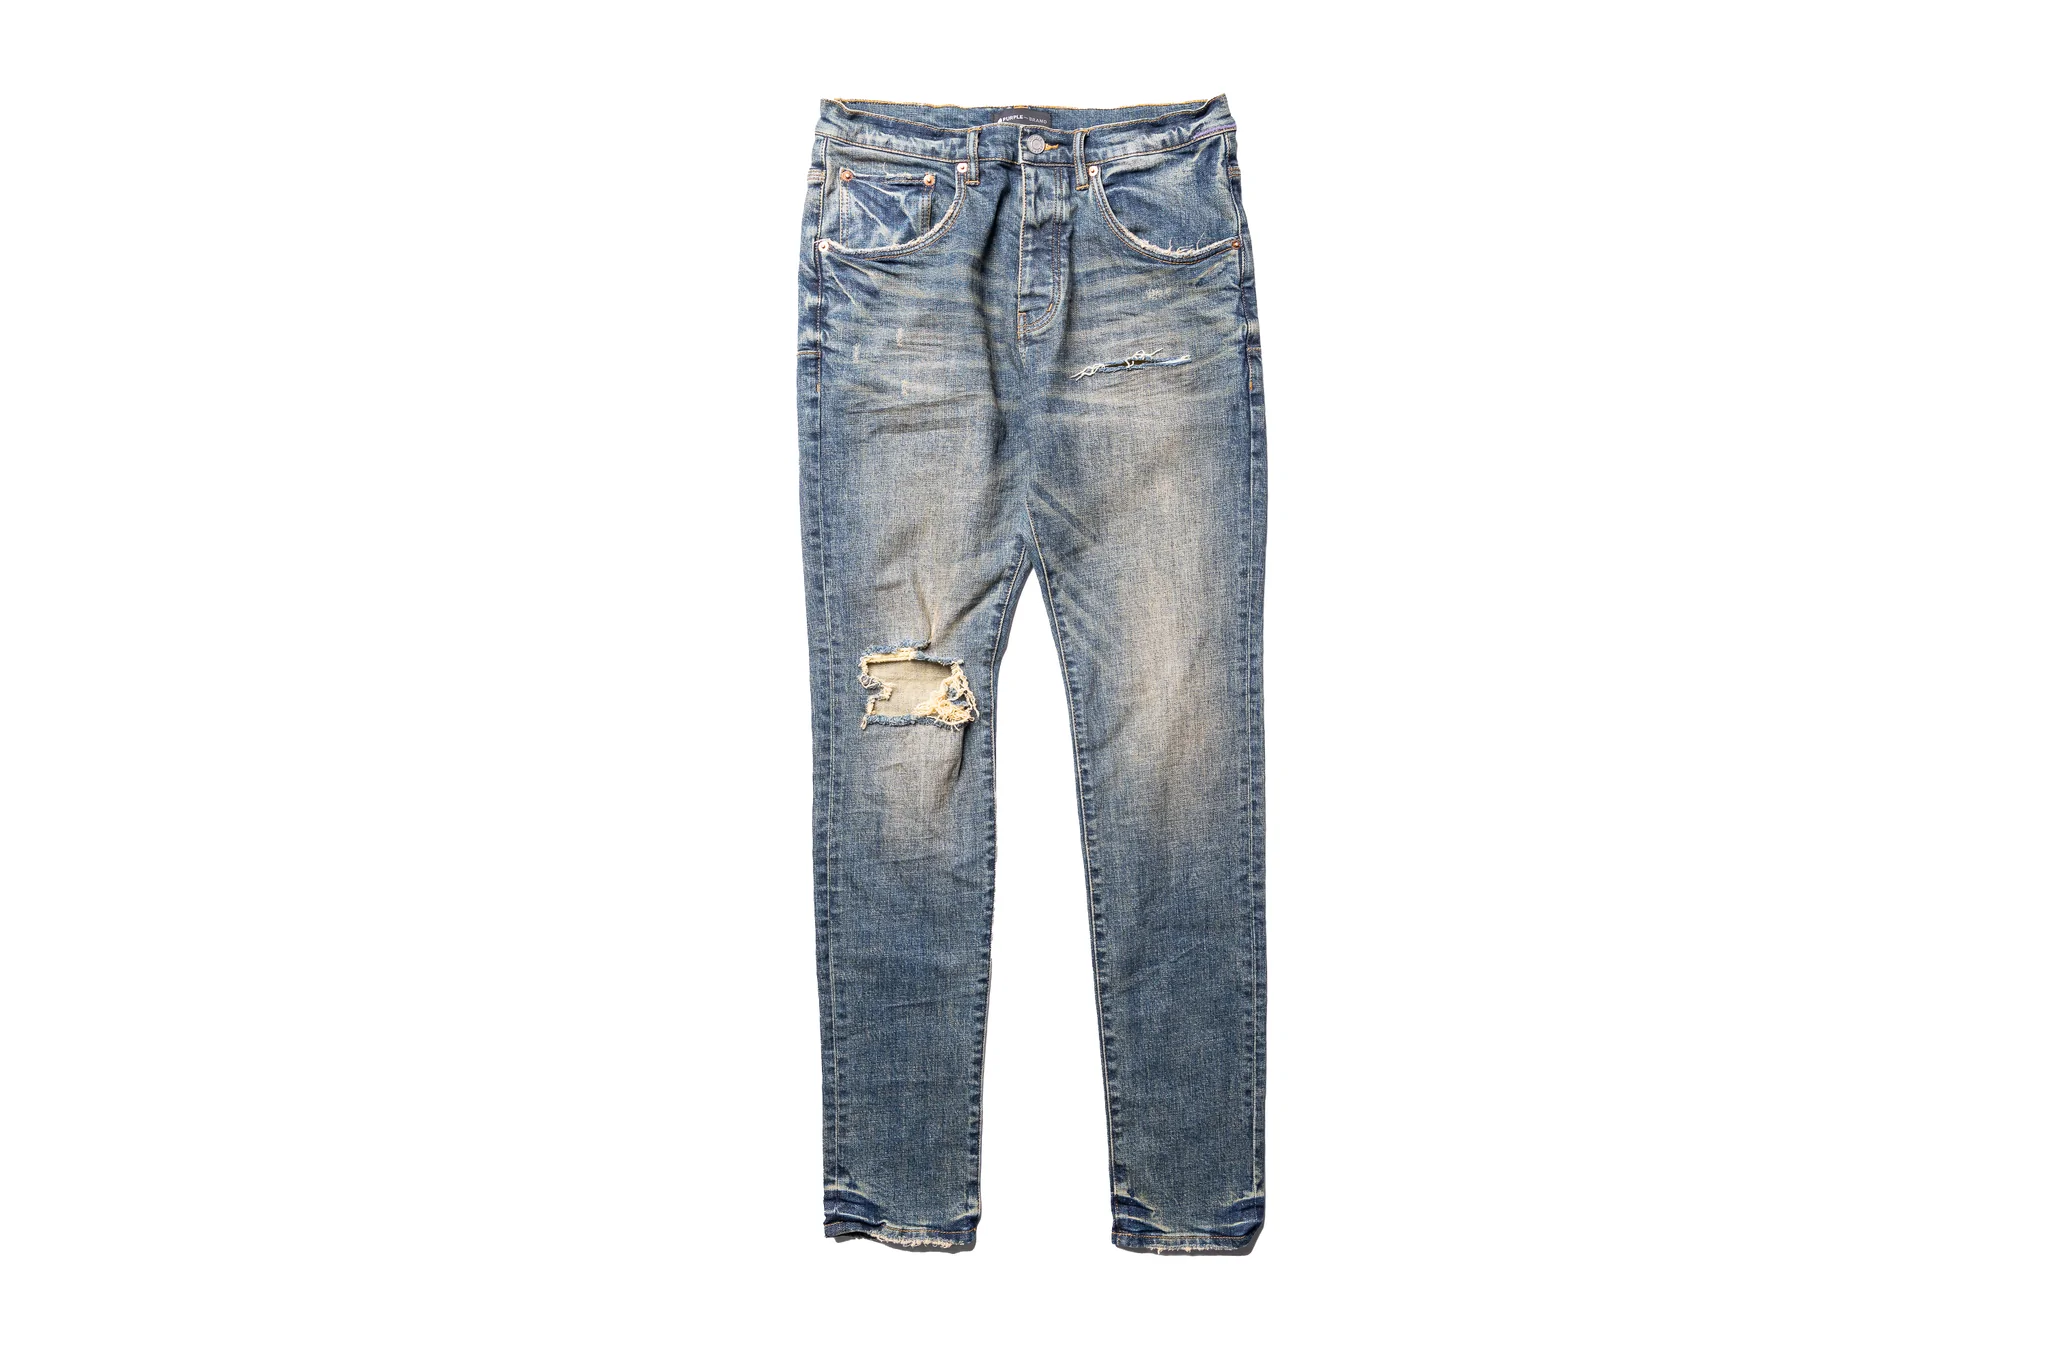 https://coveredinsauce.com/wp-content/uploads/2022/11/Covered-In-Sauce-Clothing-Purple-Brand-Mid-Rise-Slime-Jean-Distressed-Dirty-Indigo-Blowout2.webp